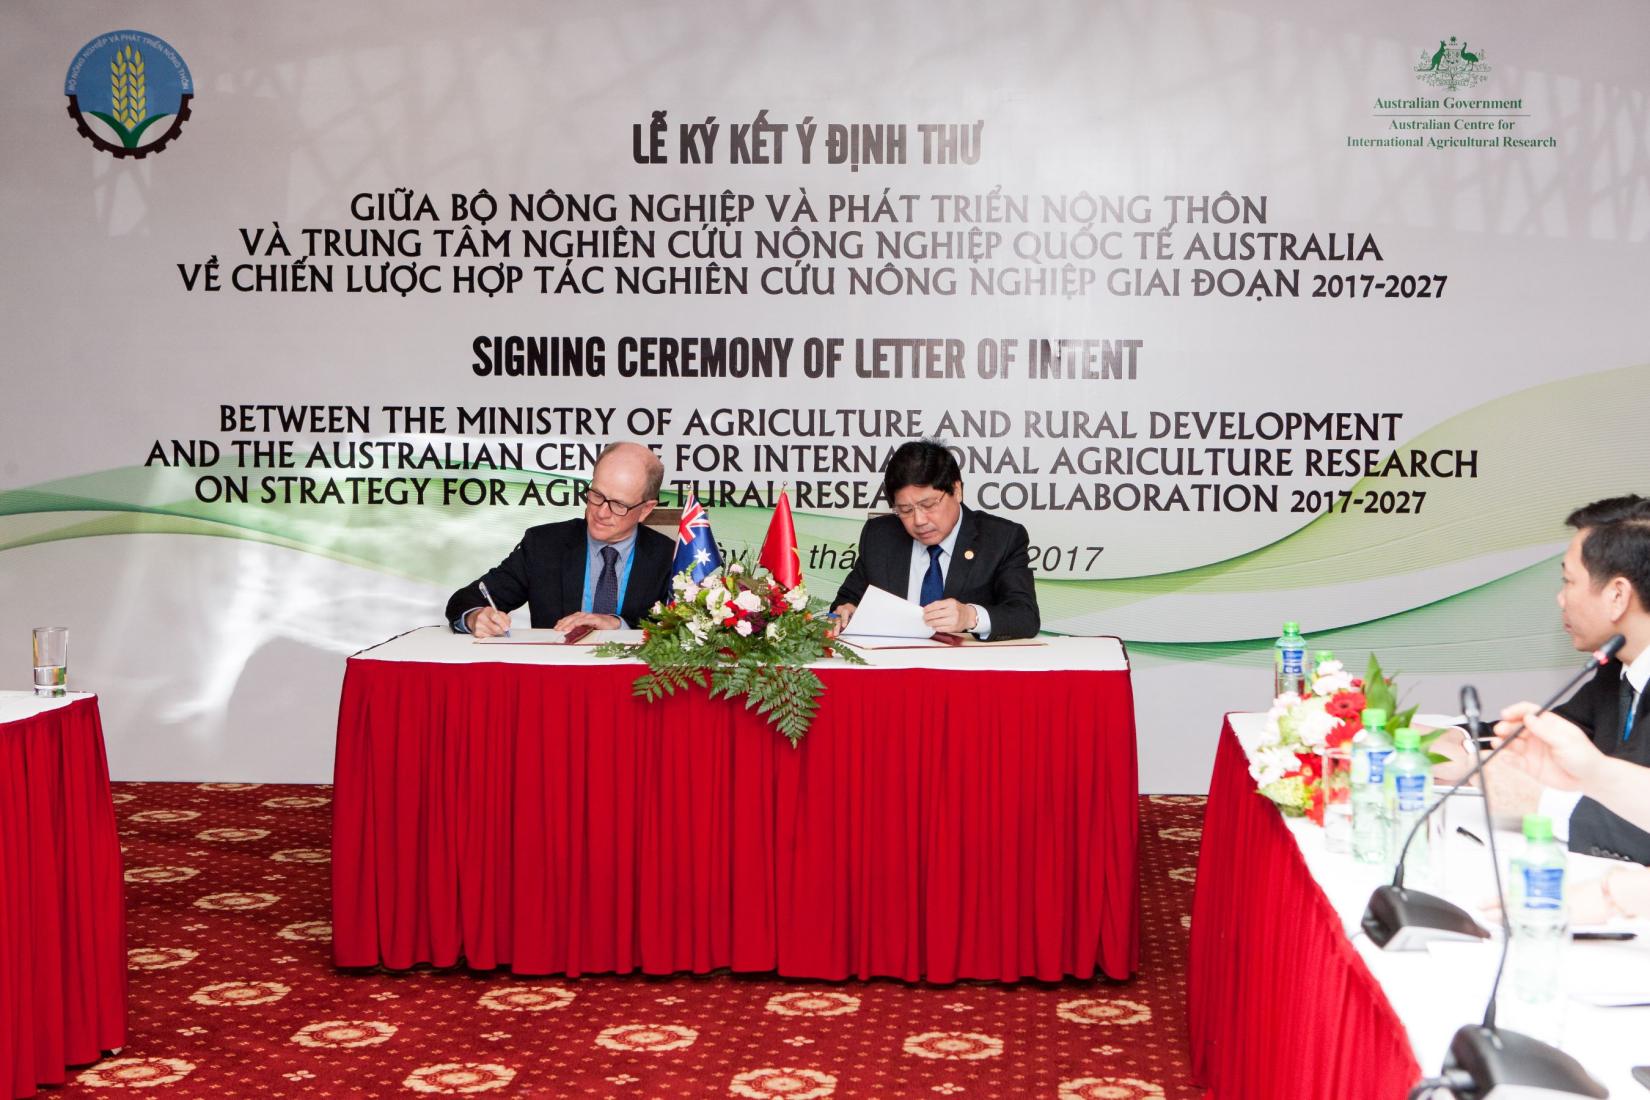 Two men sitting a an official table with a red tablecloth signing documents